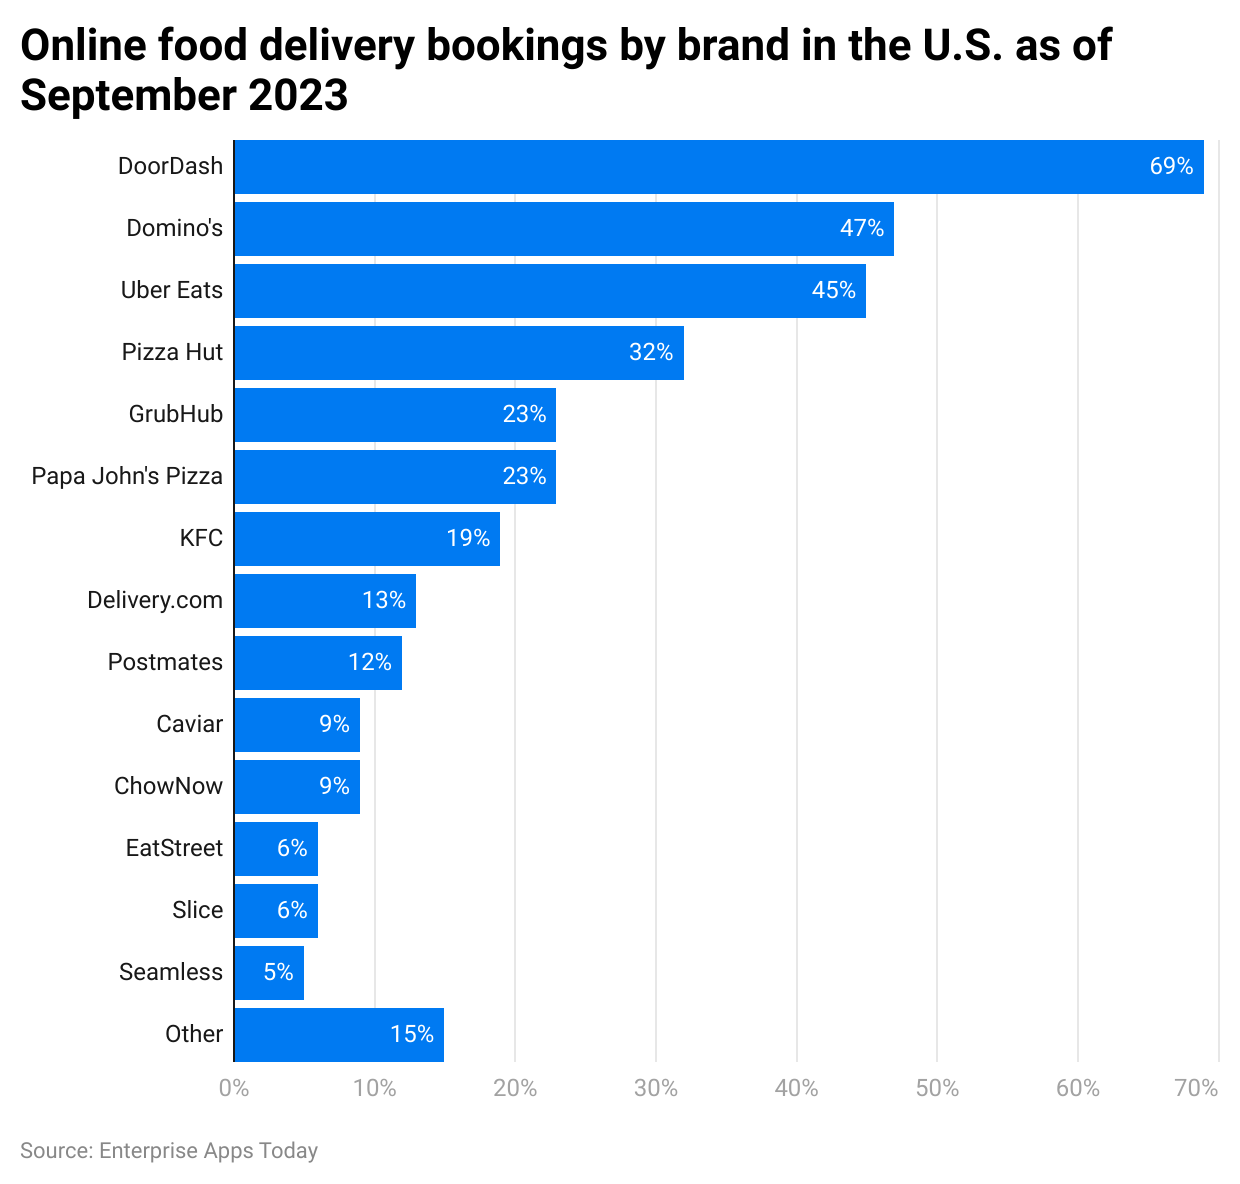 online-food-delivery-bookings-by-brand-in-the-u-s-as-of-september-2023.